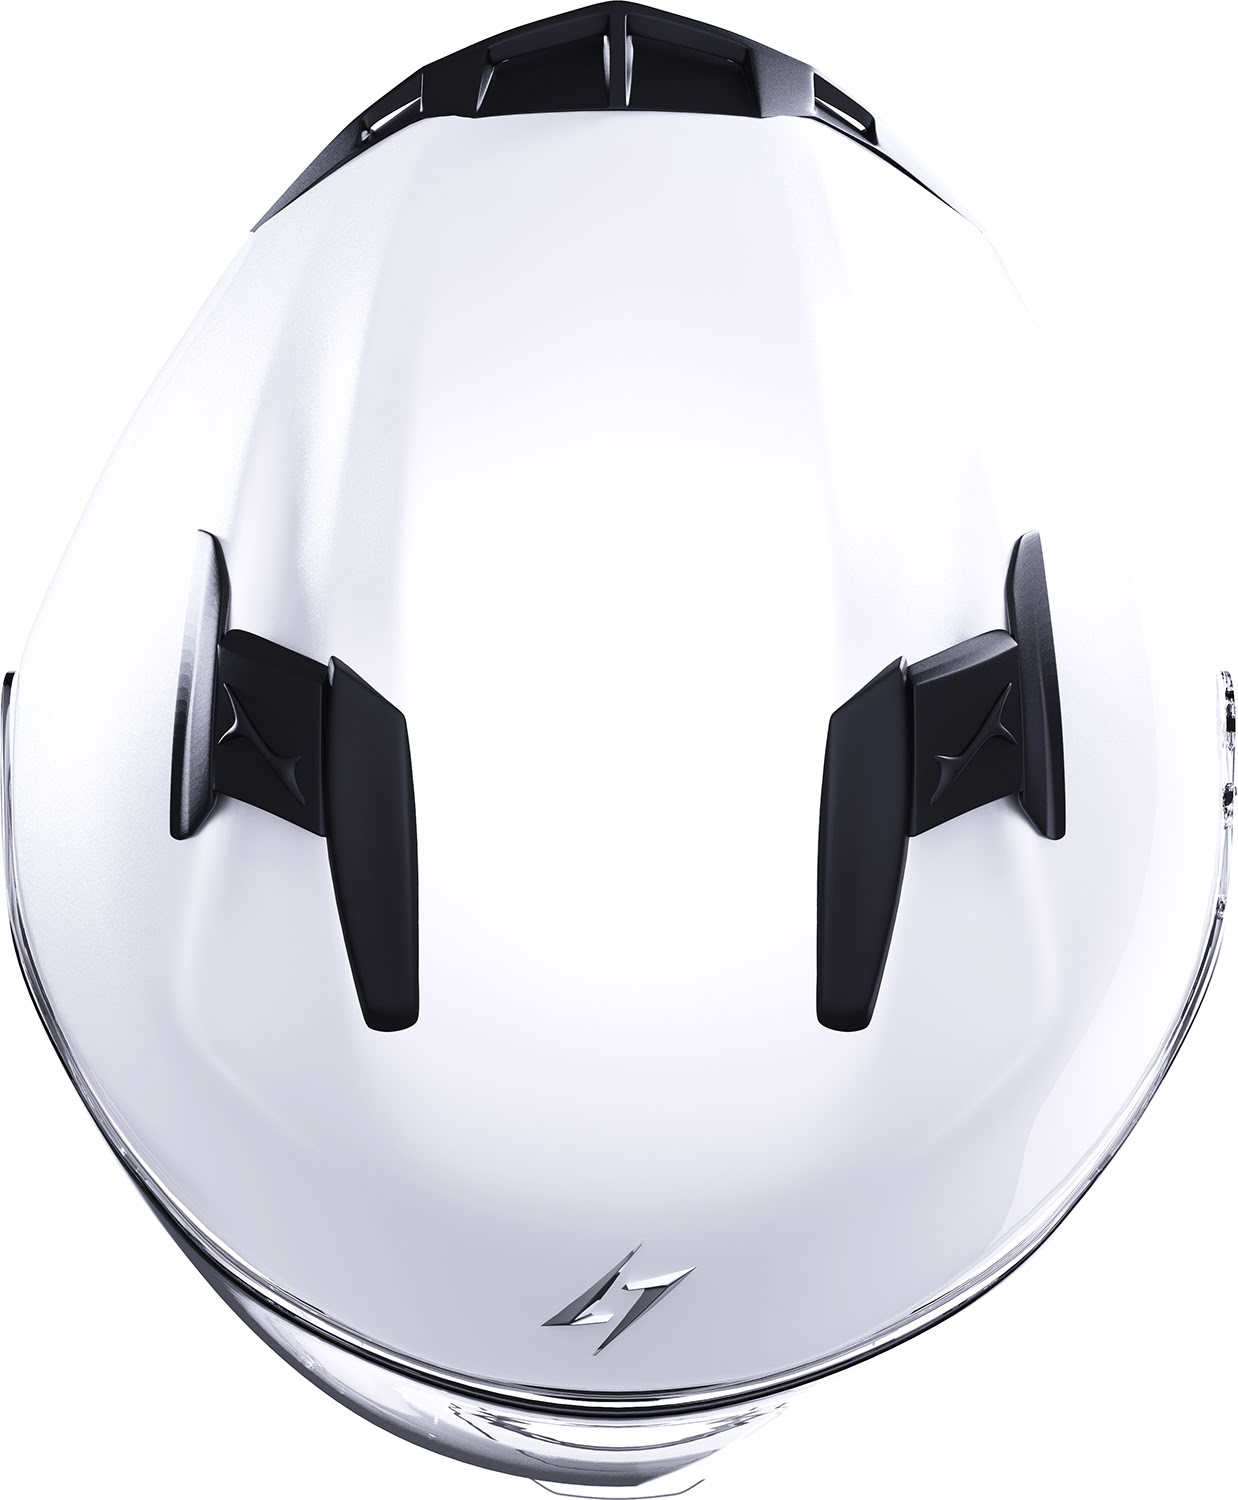 Helmet RIVAL SOLID White Pearly STORMER 